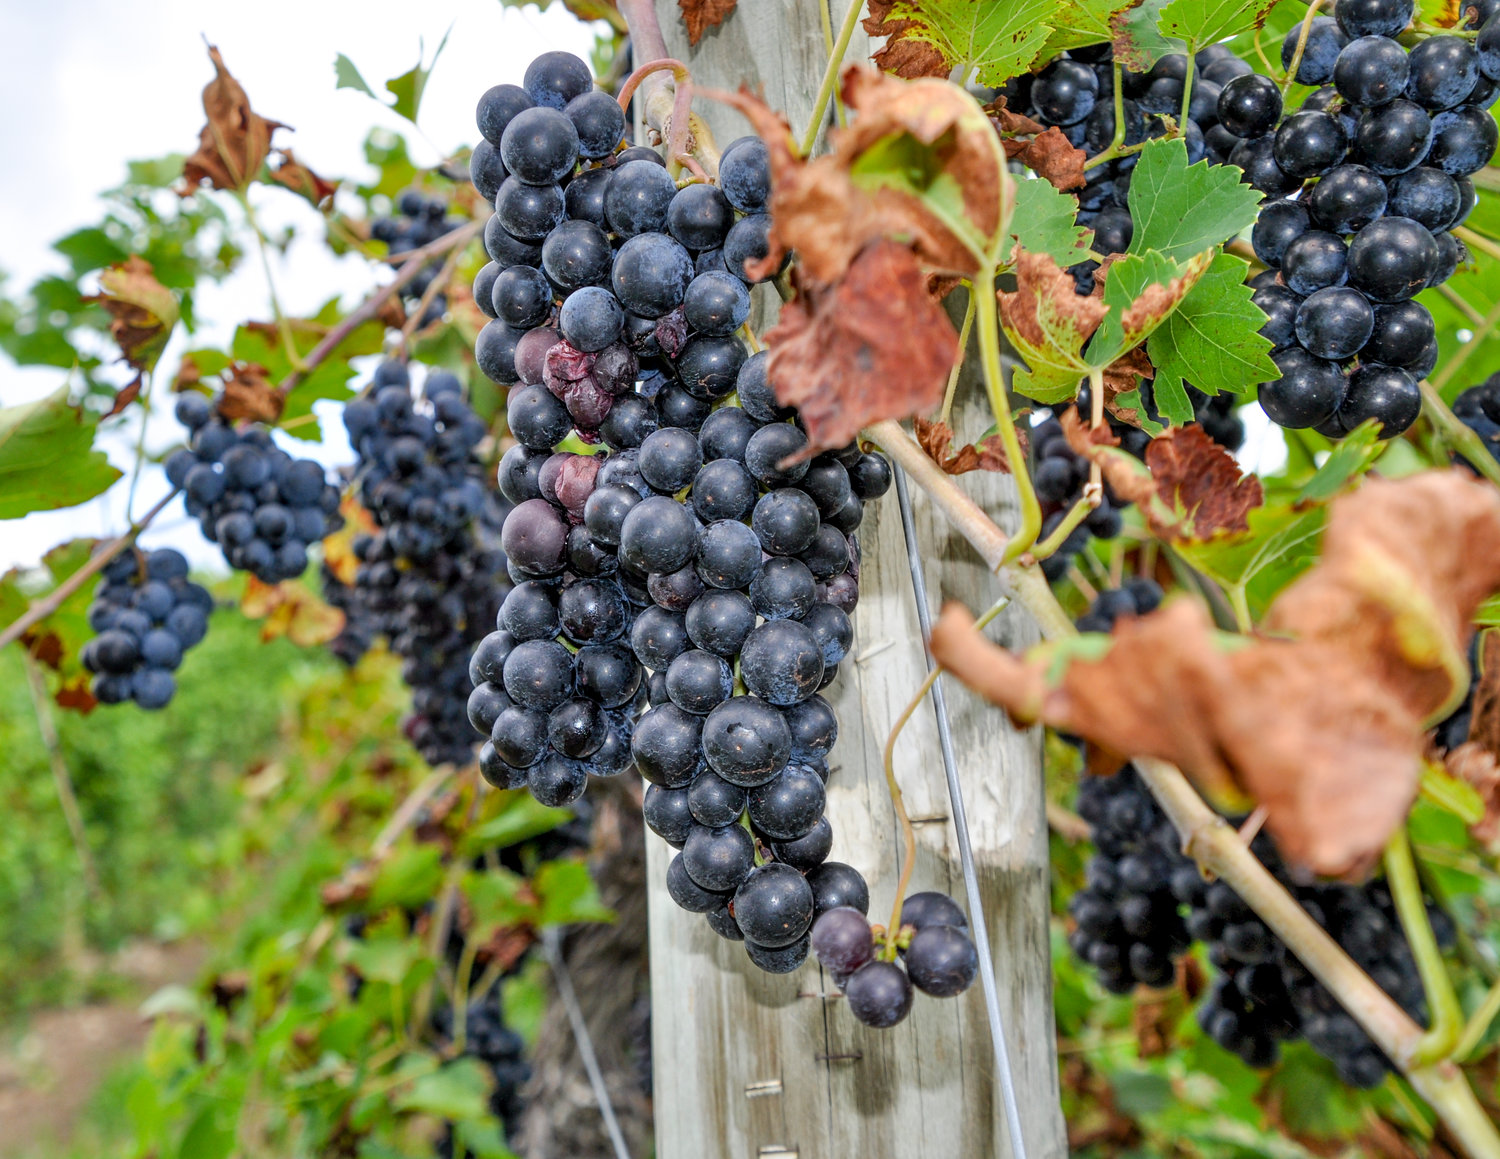 In my youth, old man Wagner cultivated Concord grapes for Welch’s, but these days, it’s Wagner Vineyards Estate Winery, one of the oldest and most recognized in the Finger Lakes region, family owned and operated for five generations.